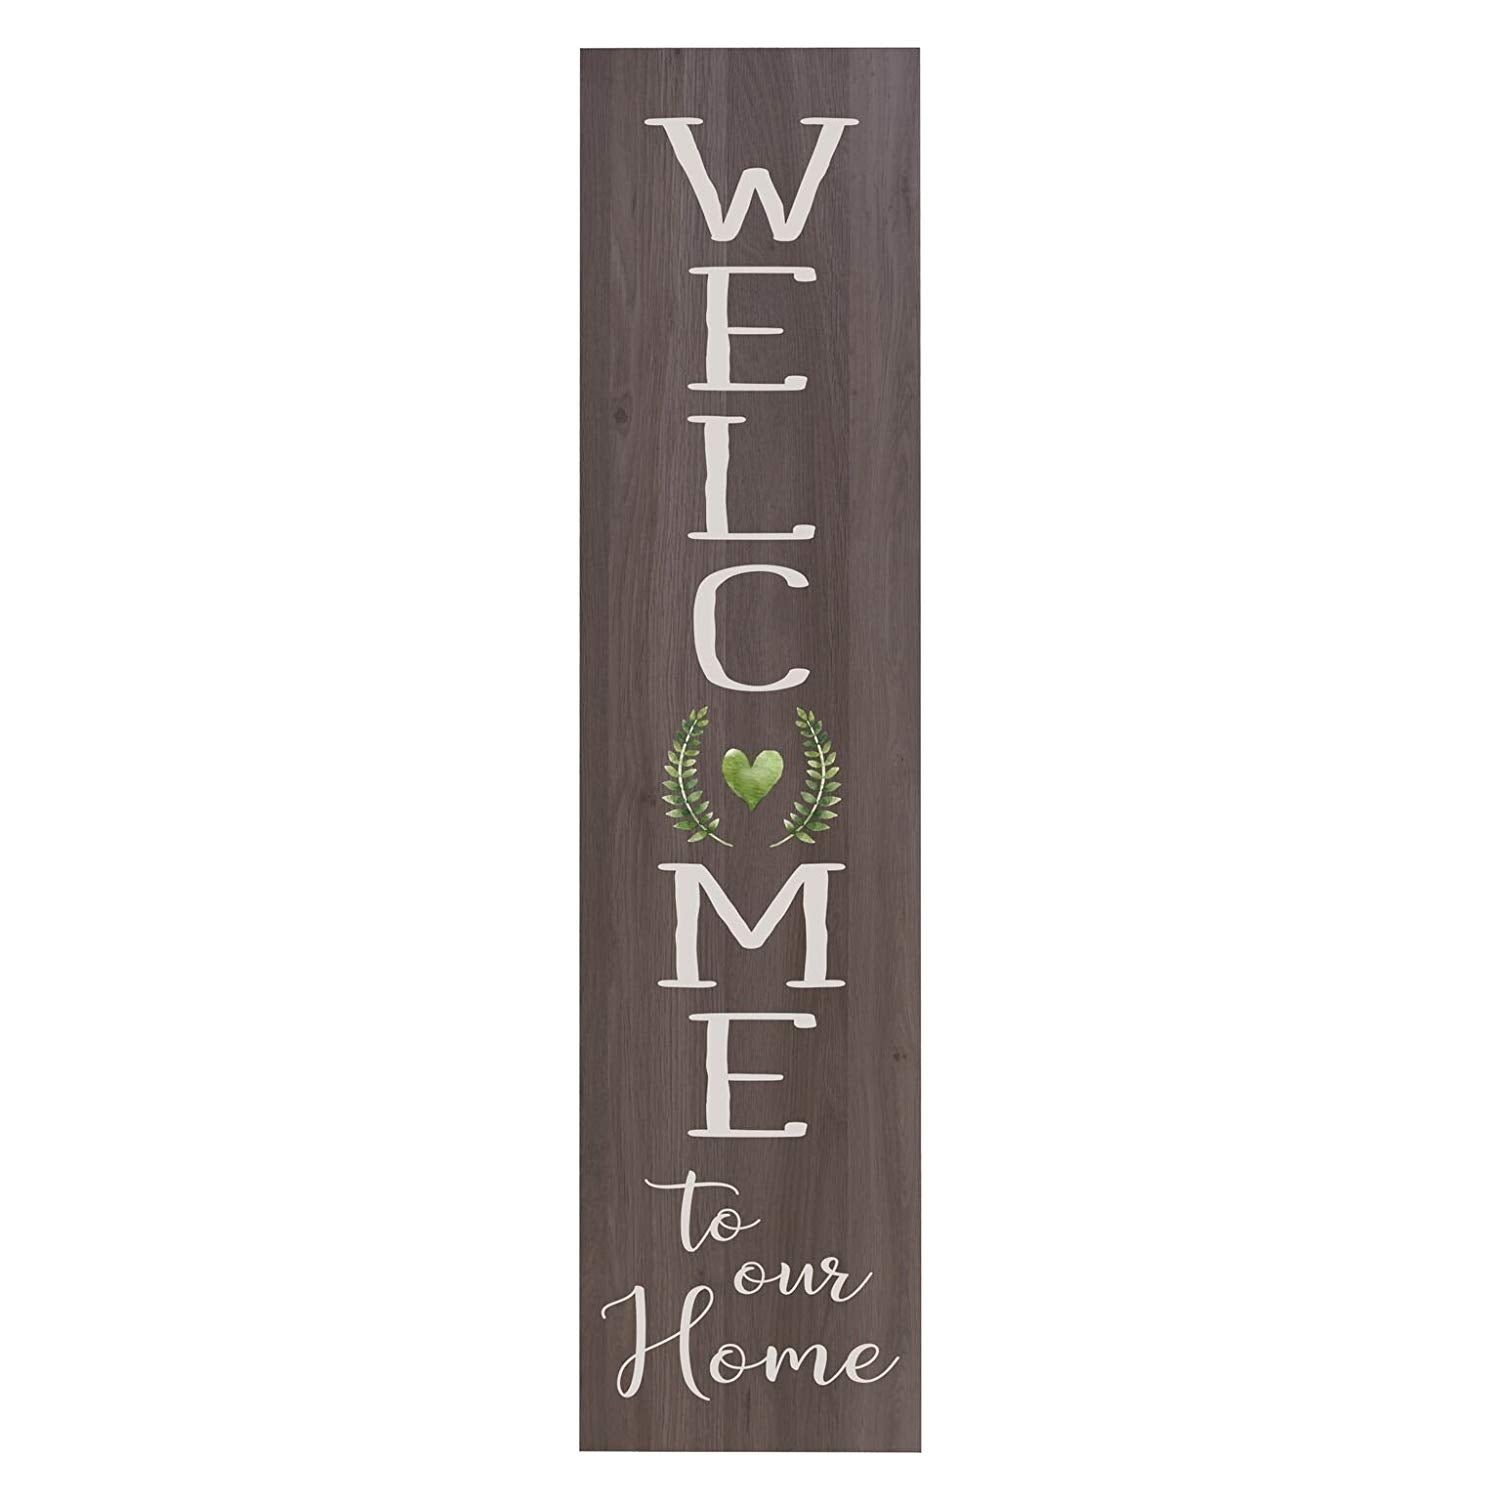 welcome family sign plaque decor house wall family home